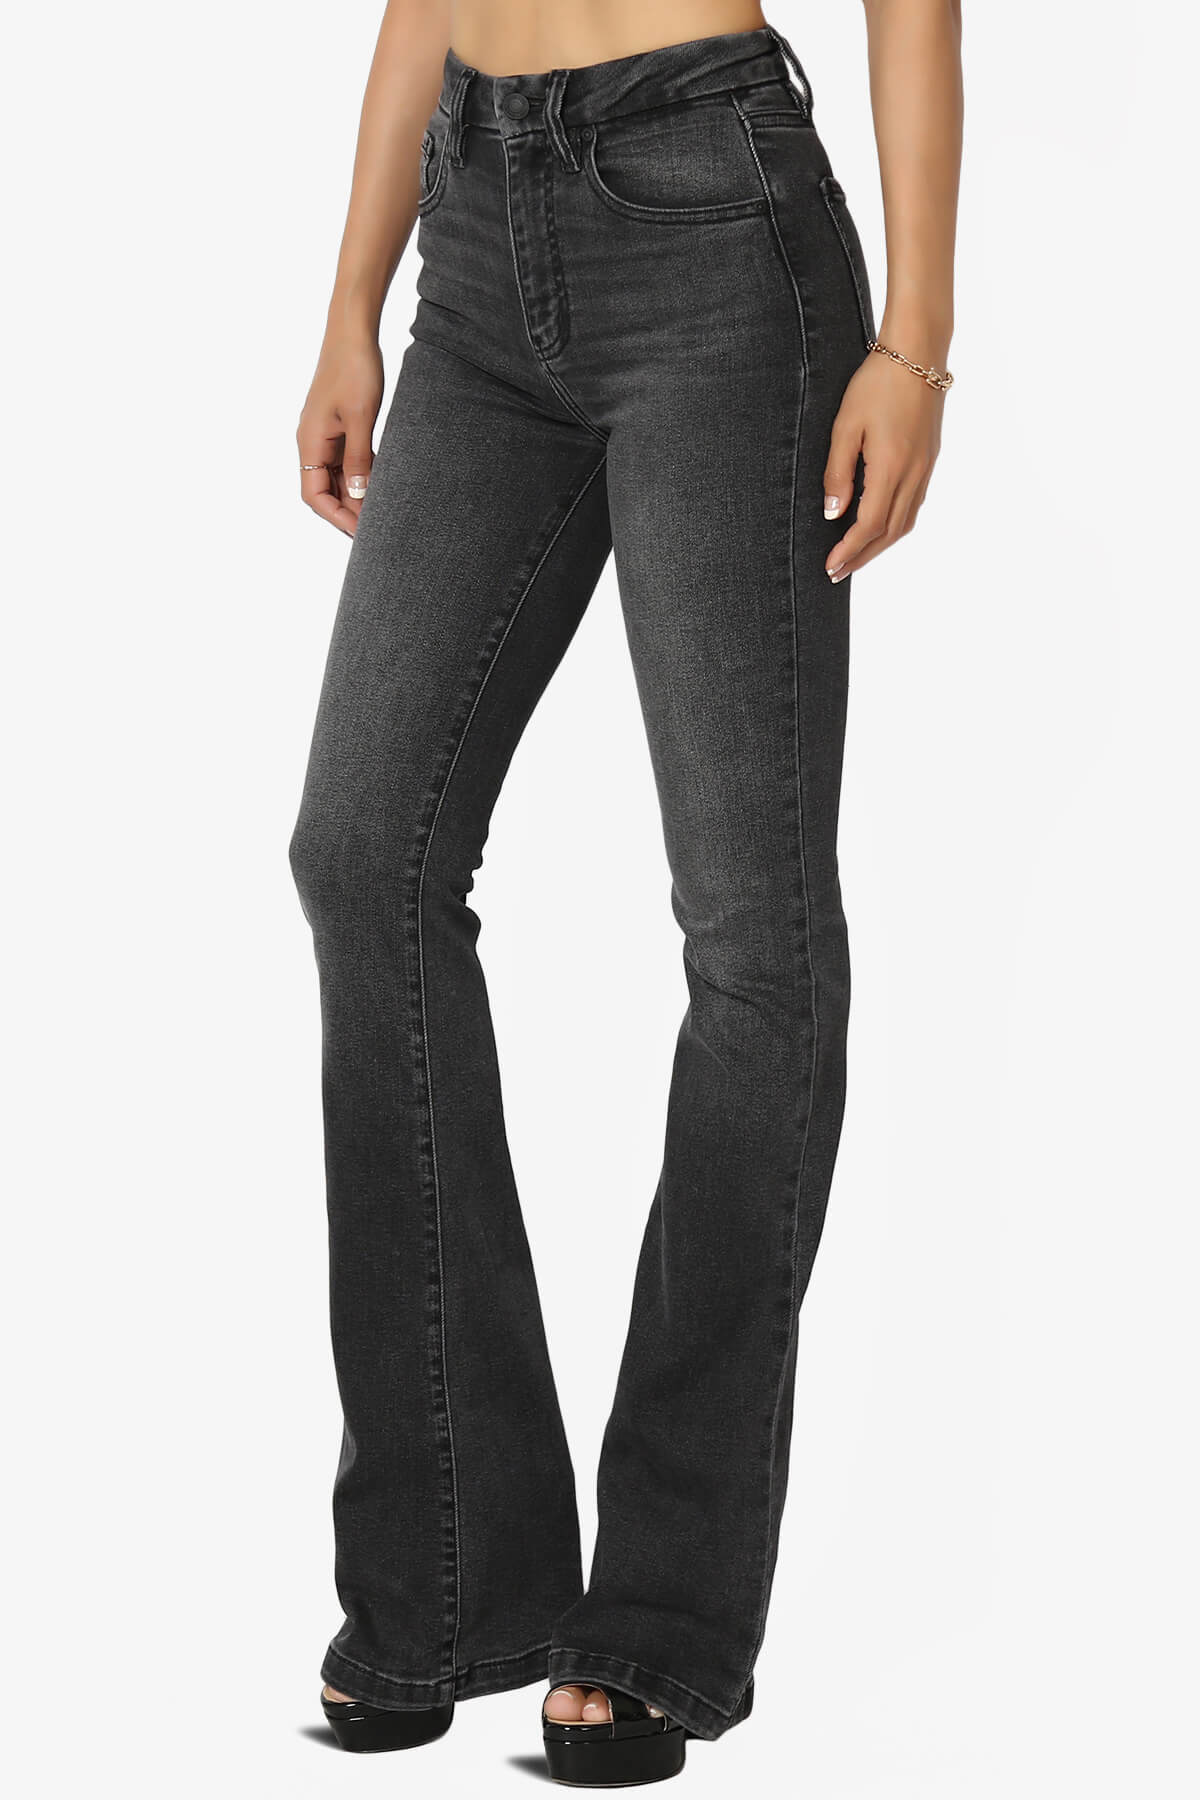 Load image into Gallery viewer, Aliyah High Rise Flare Jeans in Black BLACK_3
